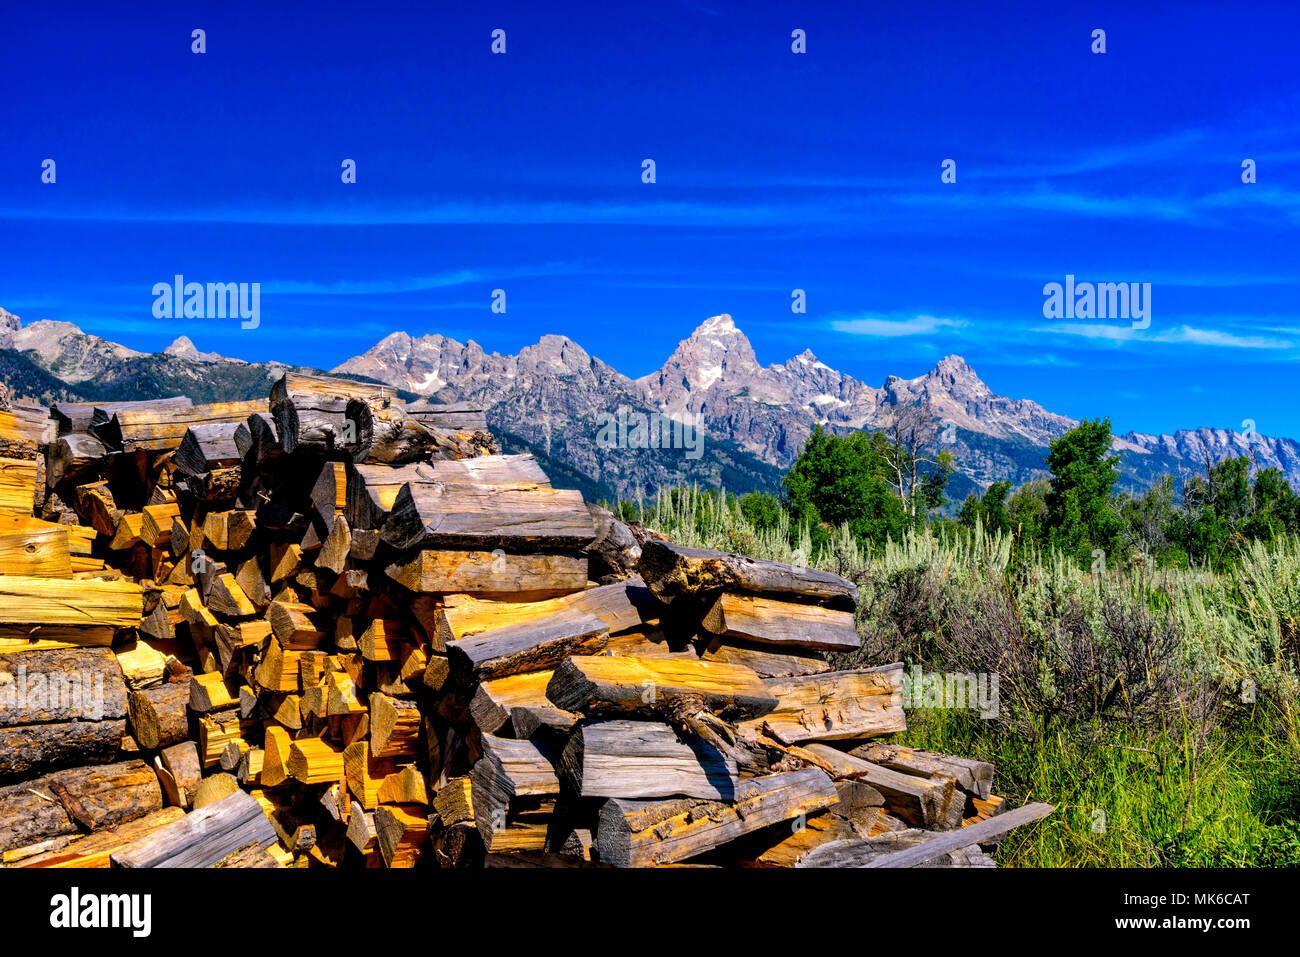 Winter wood pile near field with Teton mountains in back ground under blue sky. Stock Photo